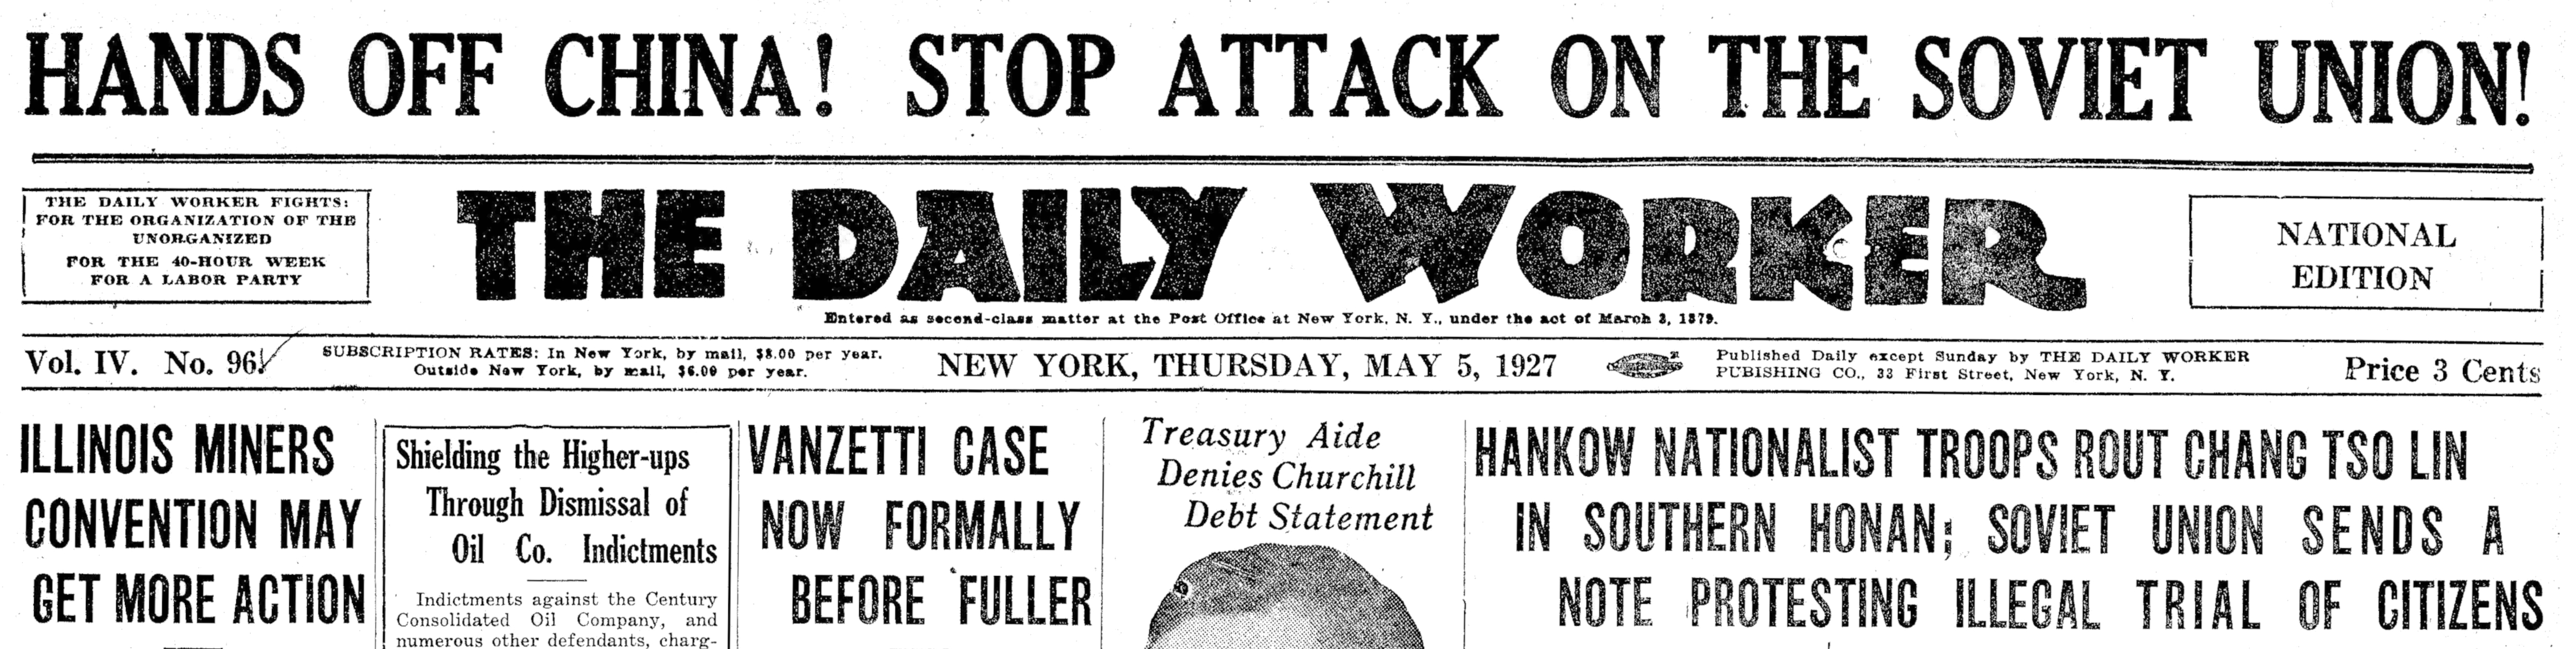 1927 Daily Worker banner